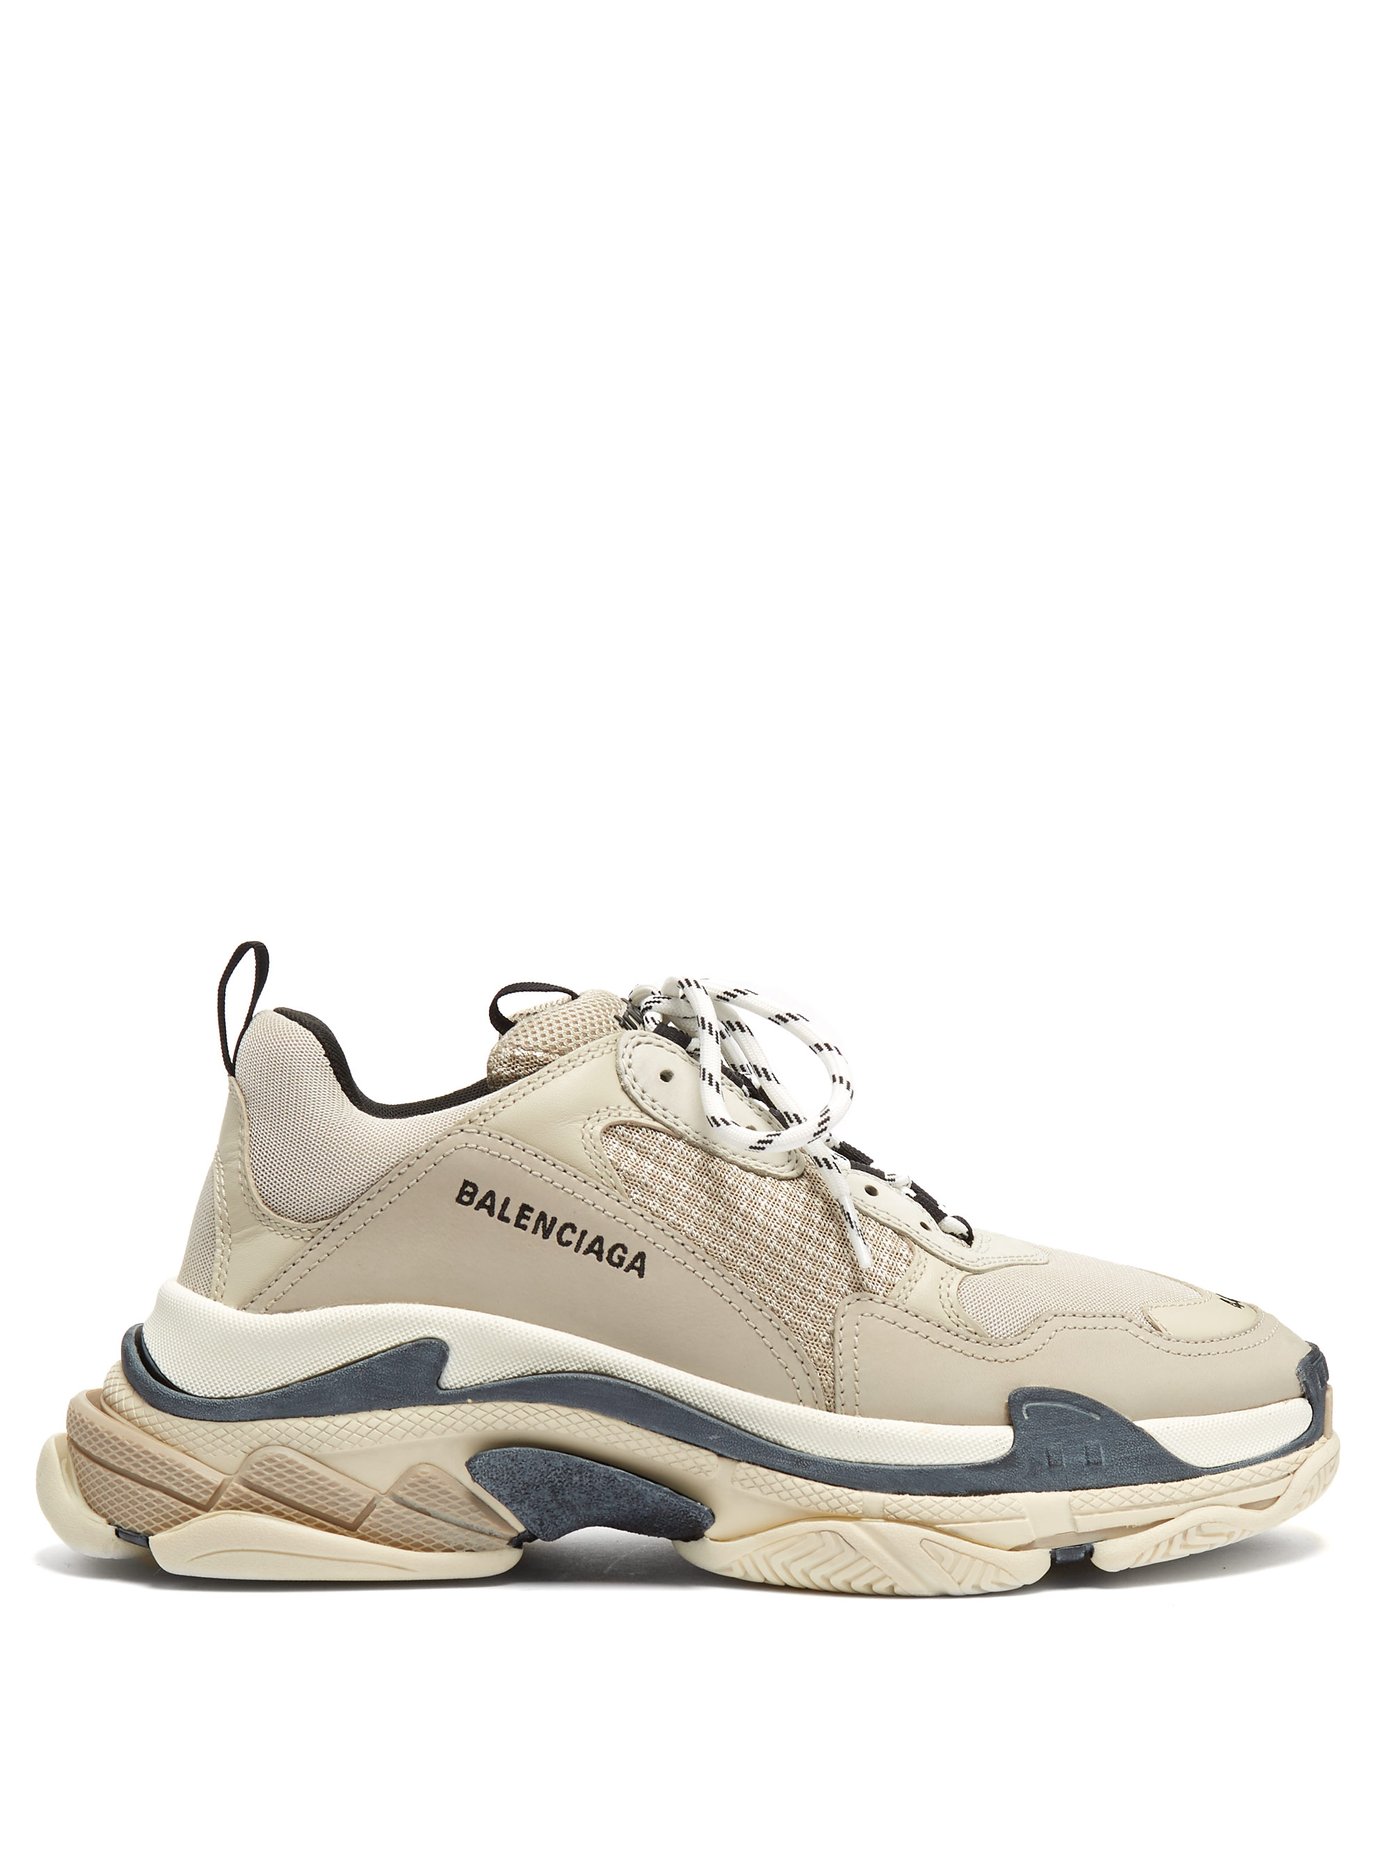 Balenciaga Pearl Grey Triple S Leather Sneakers ShopStyle